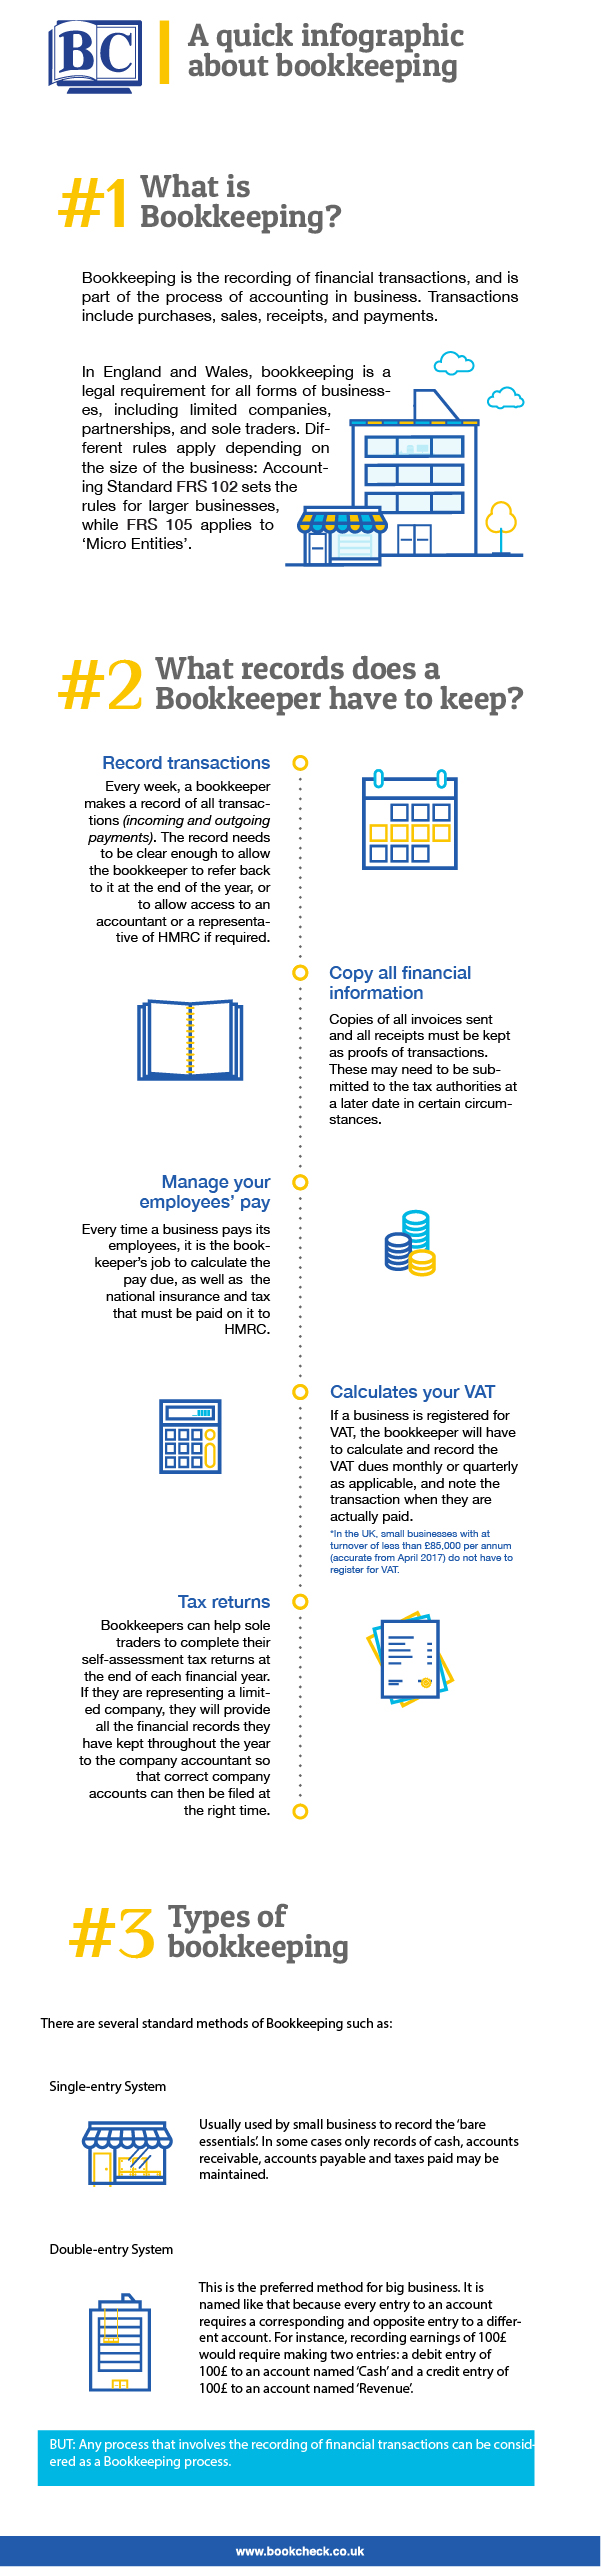 Bookkeeping infographic